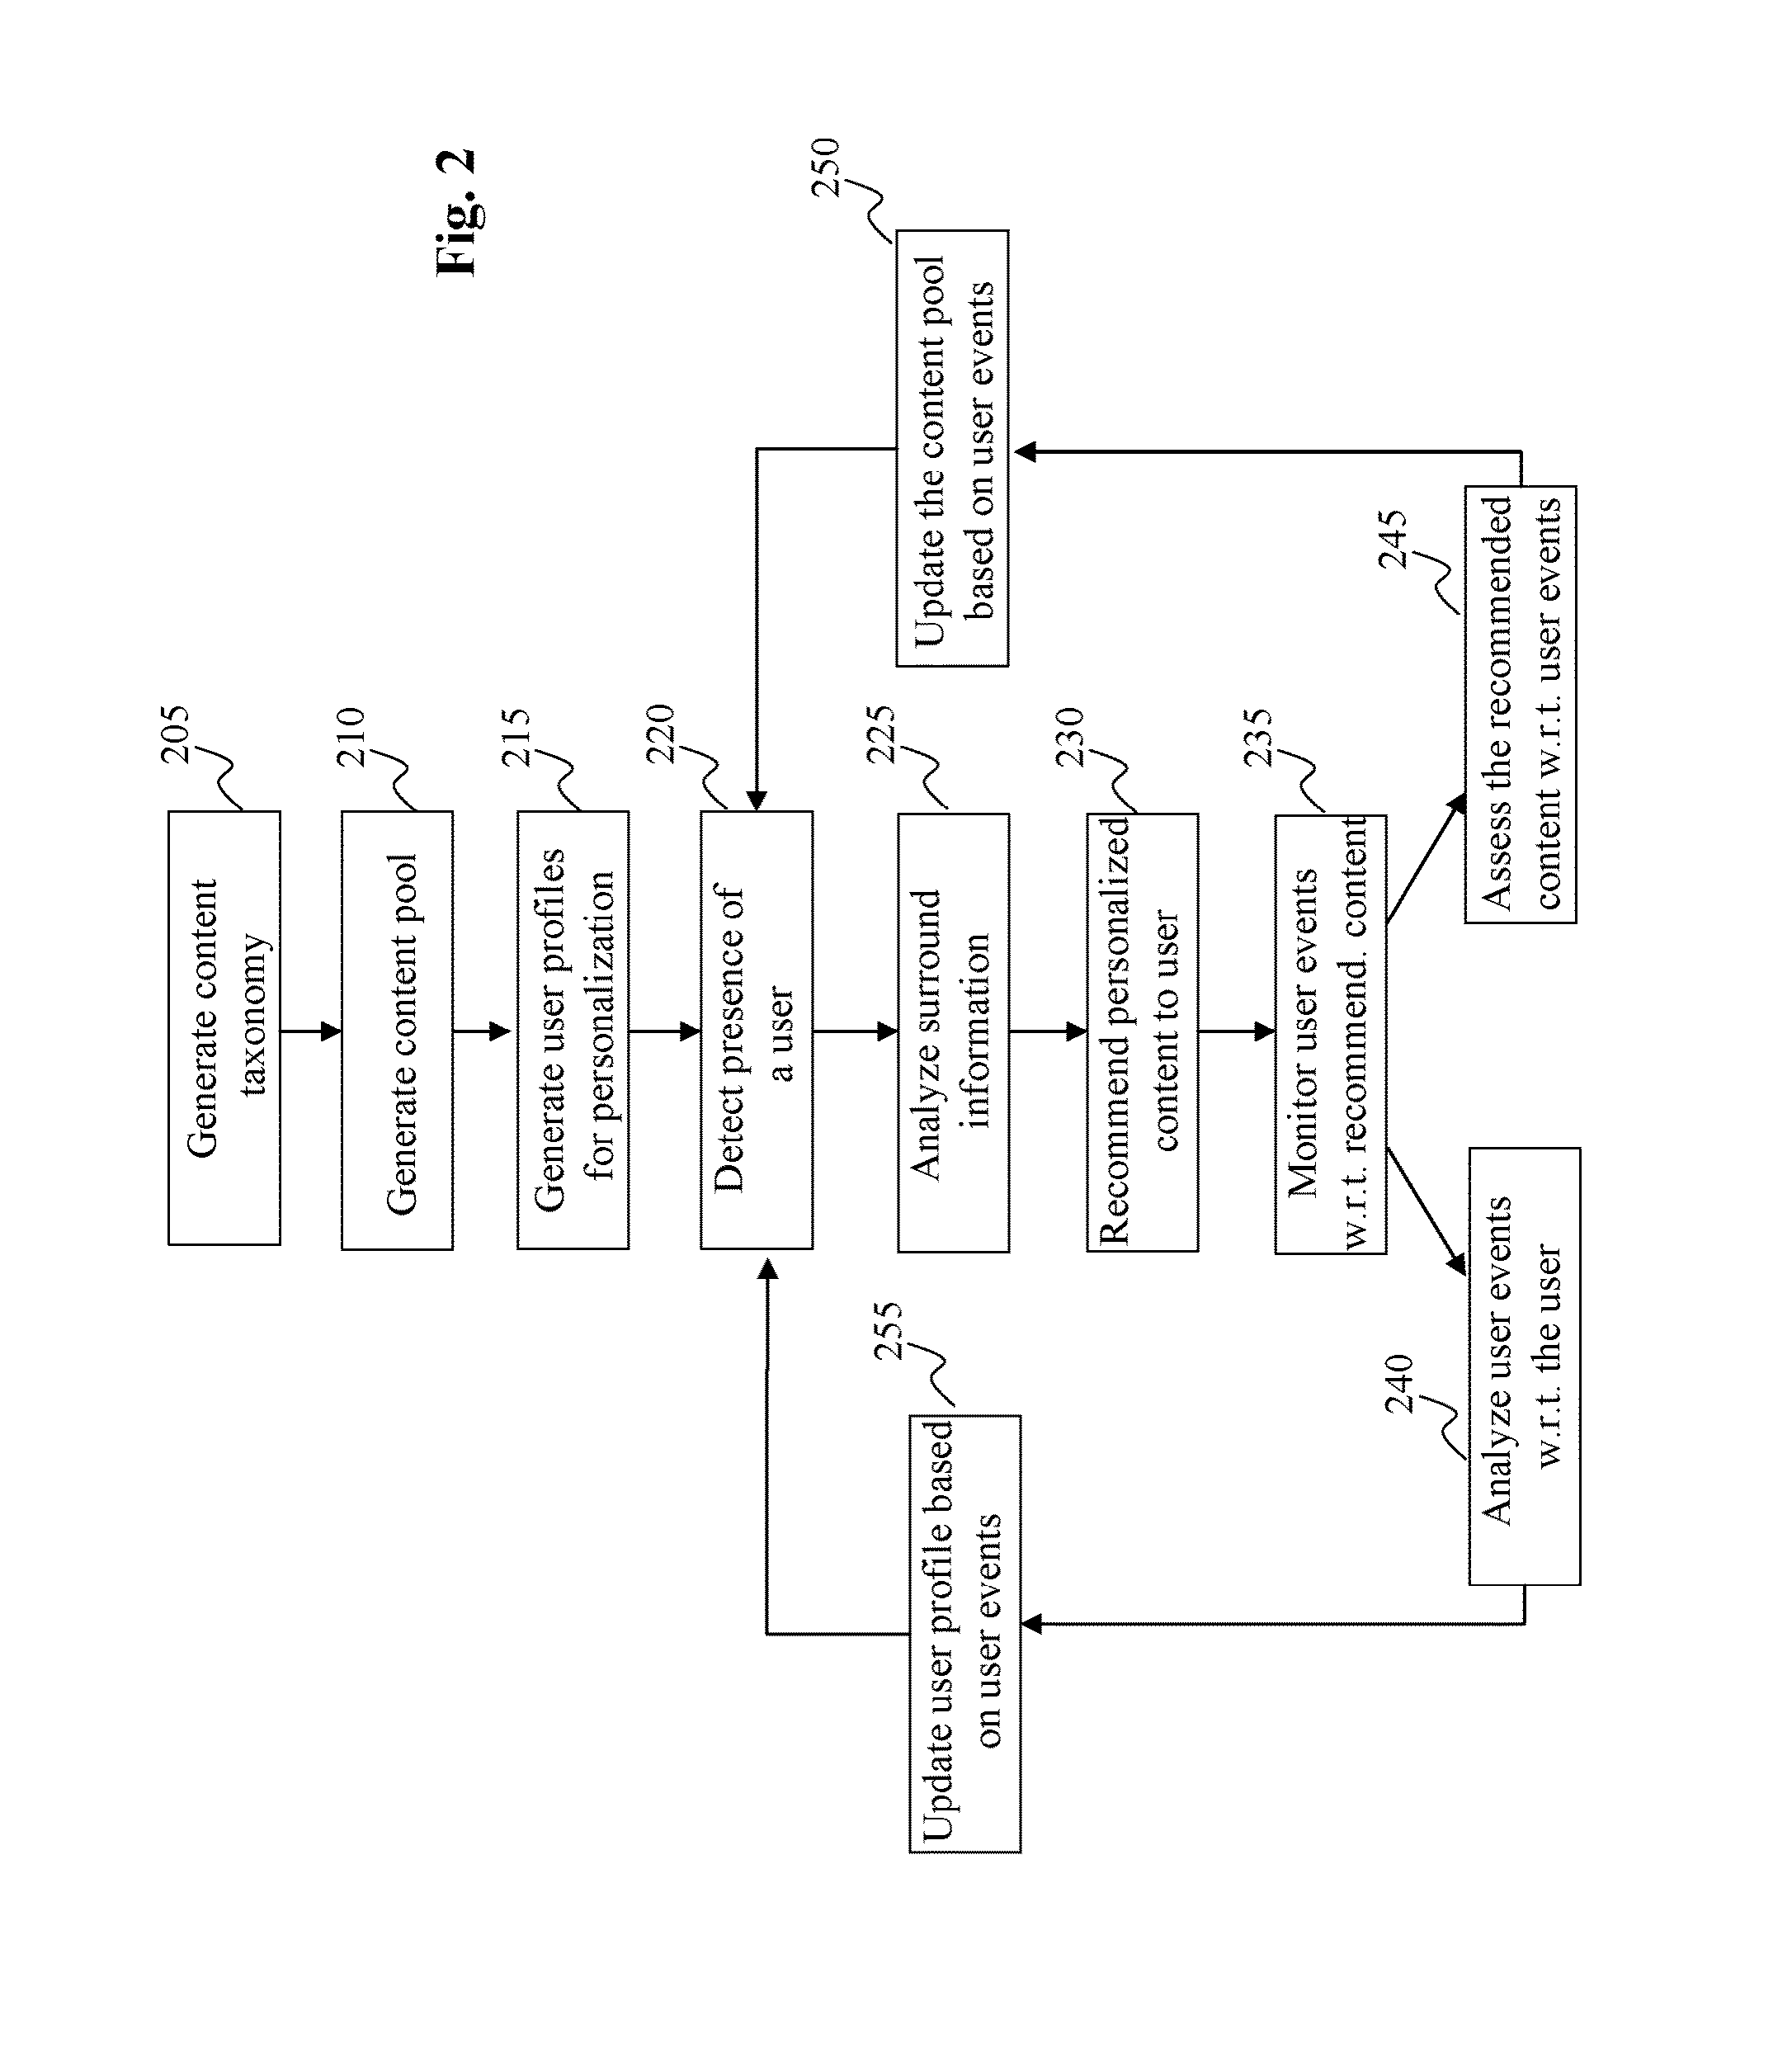 Method and system for dynamic discovery and adaptive crawling of content from the internet